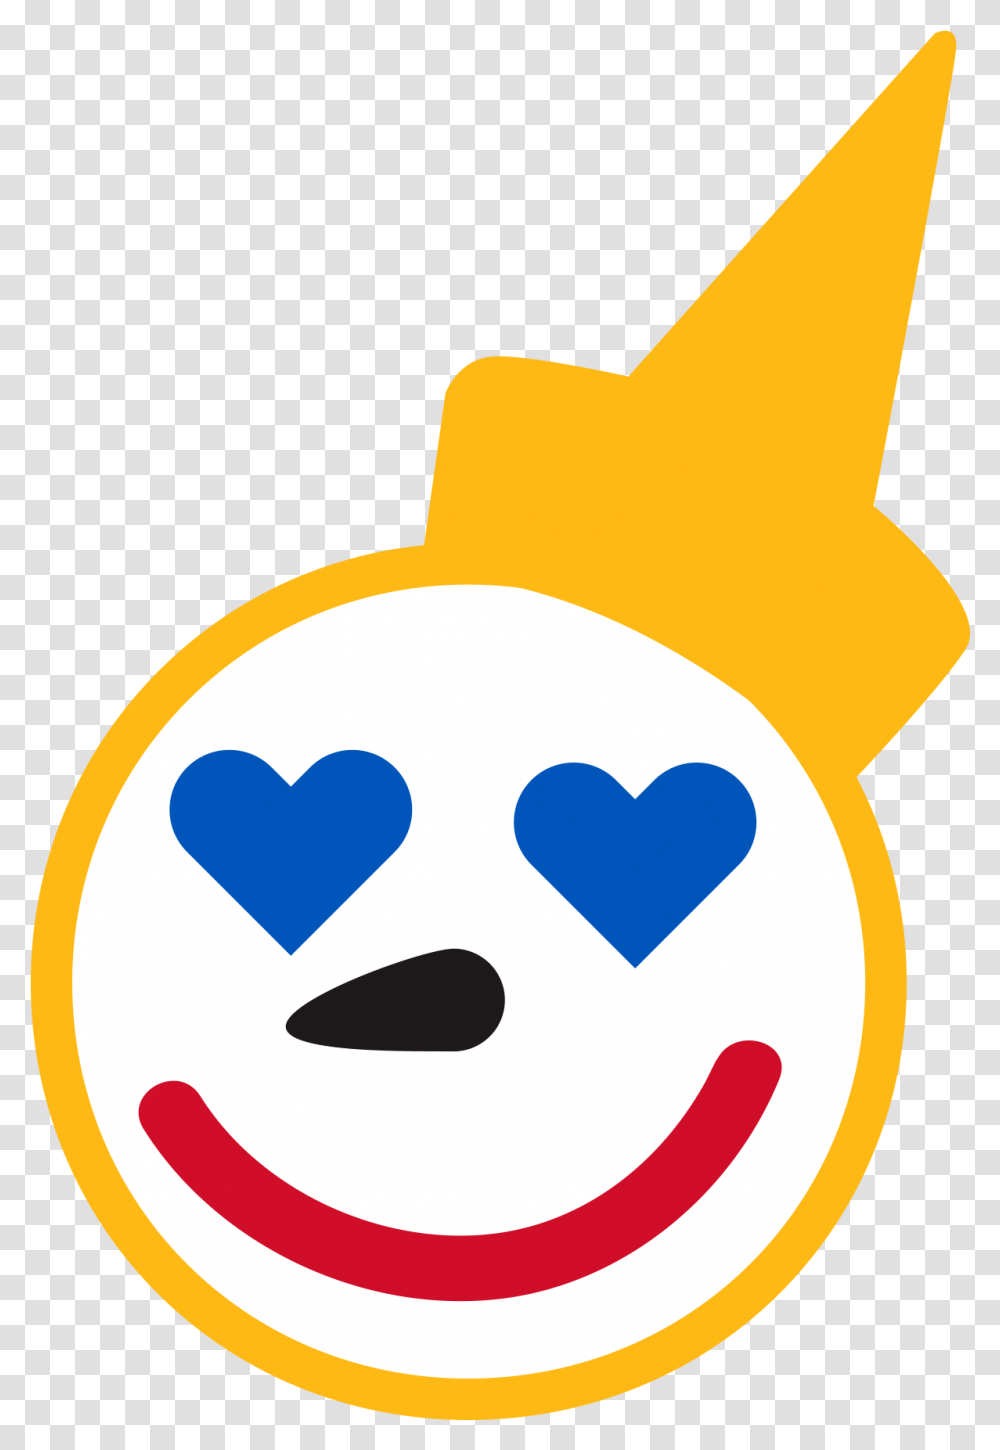 Jacks Two Truths And One Lie Jack In The Box Head Logo, Pac Man Transparent Png